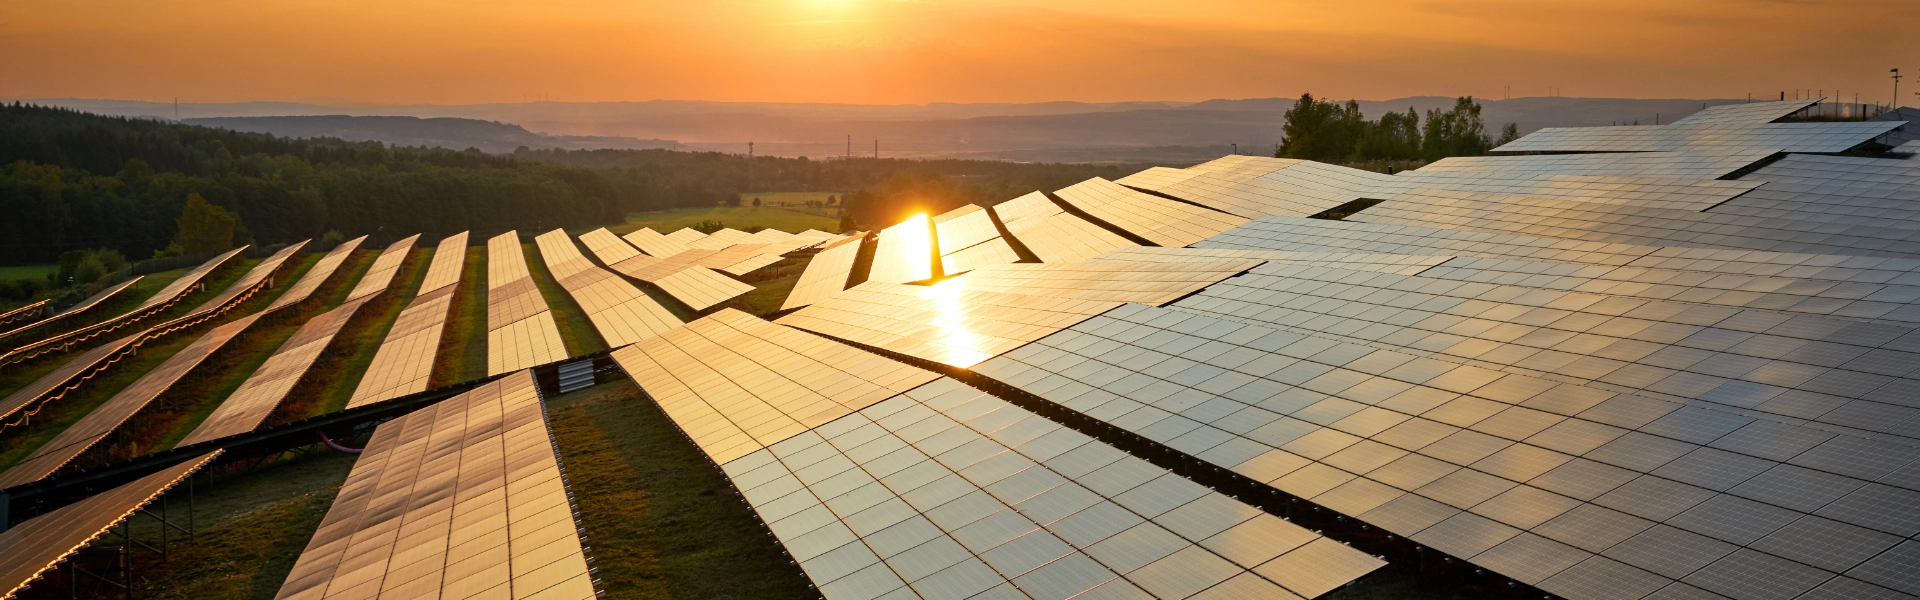 Rows of solar panels with green mountains and sun setting in the background